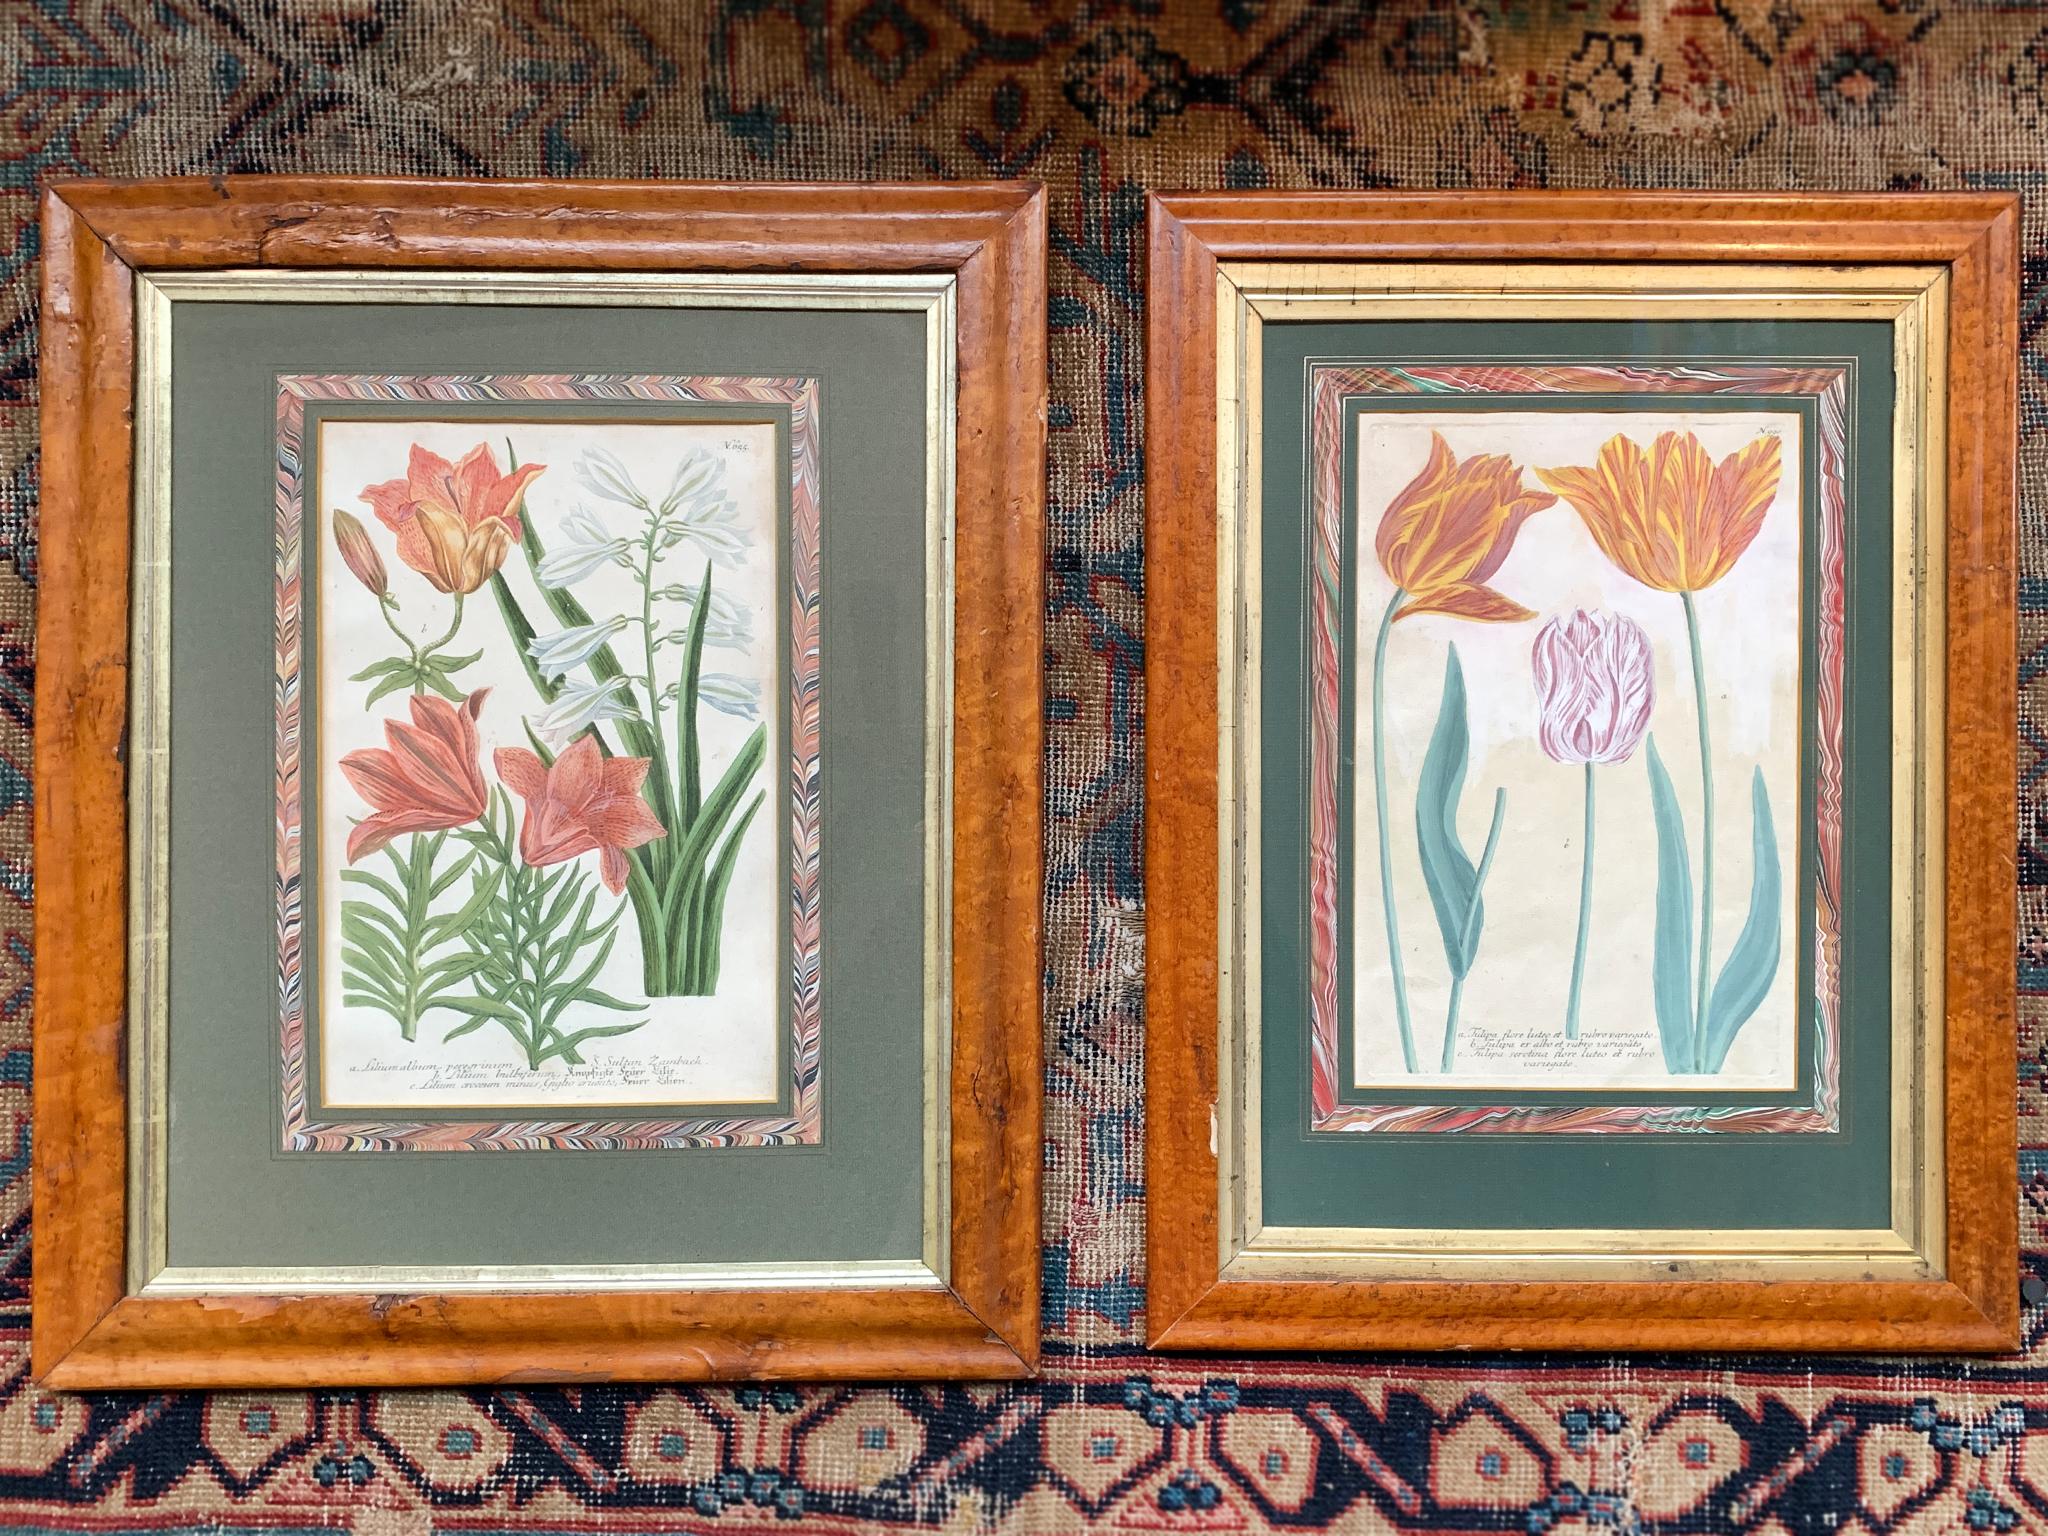 These two precious botanical illustrations were created circa 1720 by the botanist and apothecary Johann Wilhelm Weinmann (1682-1741). They are hand-colored mezzotints. One depicts tulips while the other depicts lilies. They are framed in maple